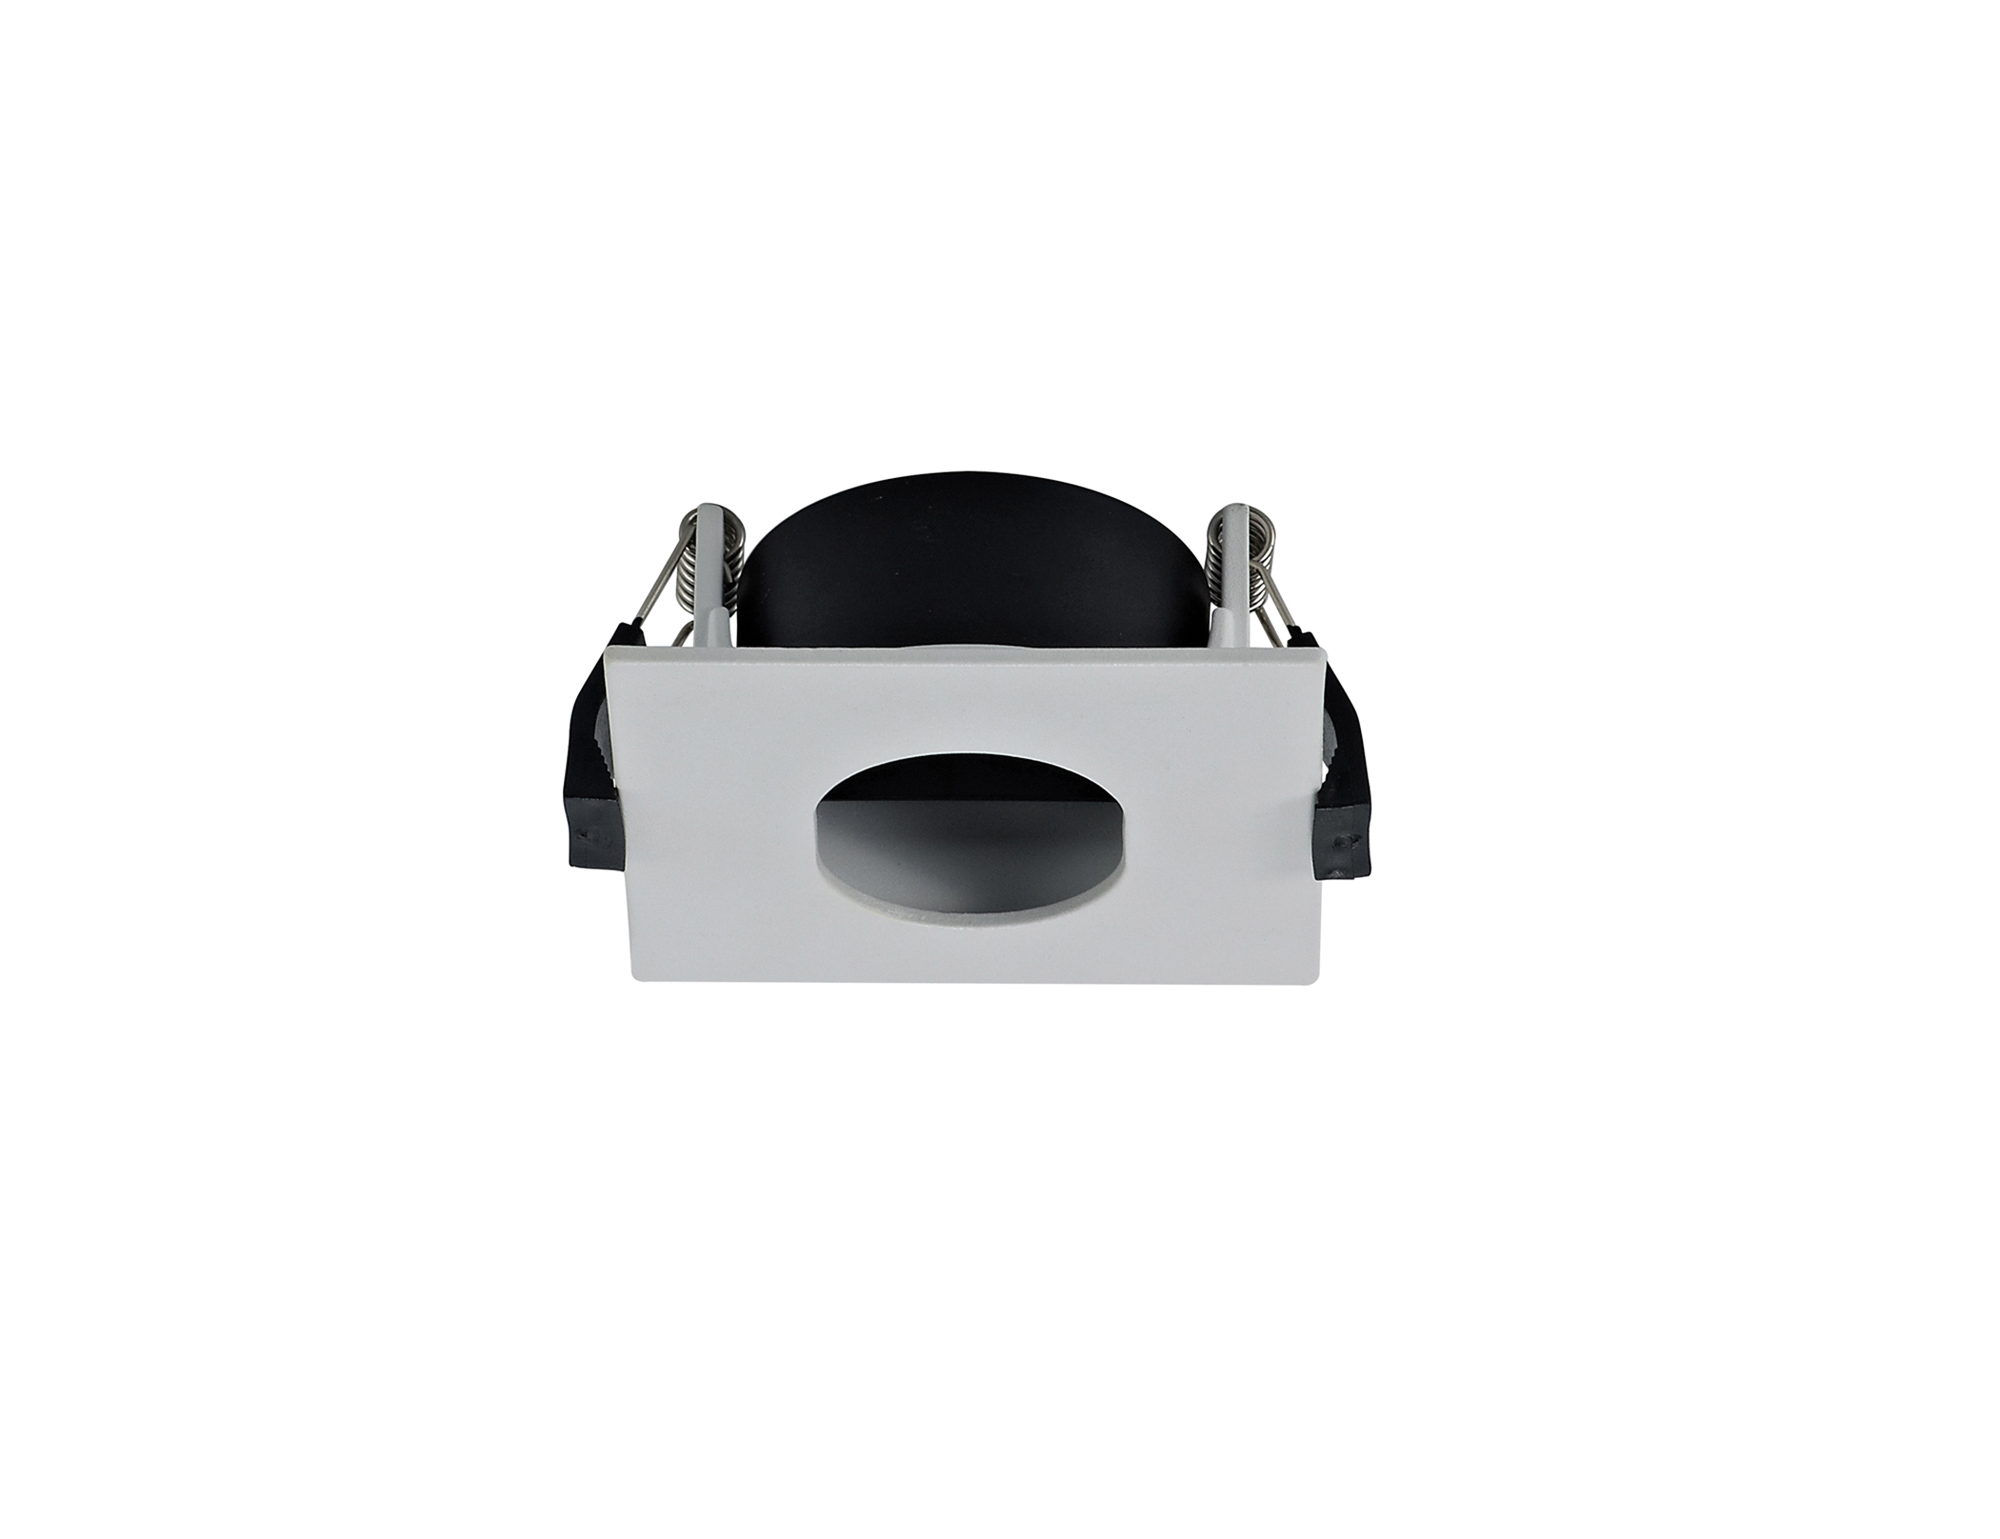 DX200367  Blate; White Recessed Square Plate with Oval Pinhole Spotlight - LED ENGINE REQUIRED; 83x83mm; Cut Out: 76mm; 3yrs Warranty